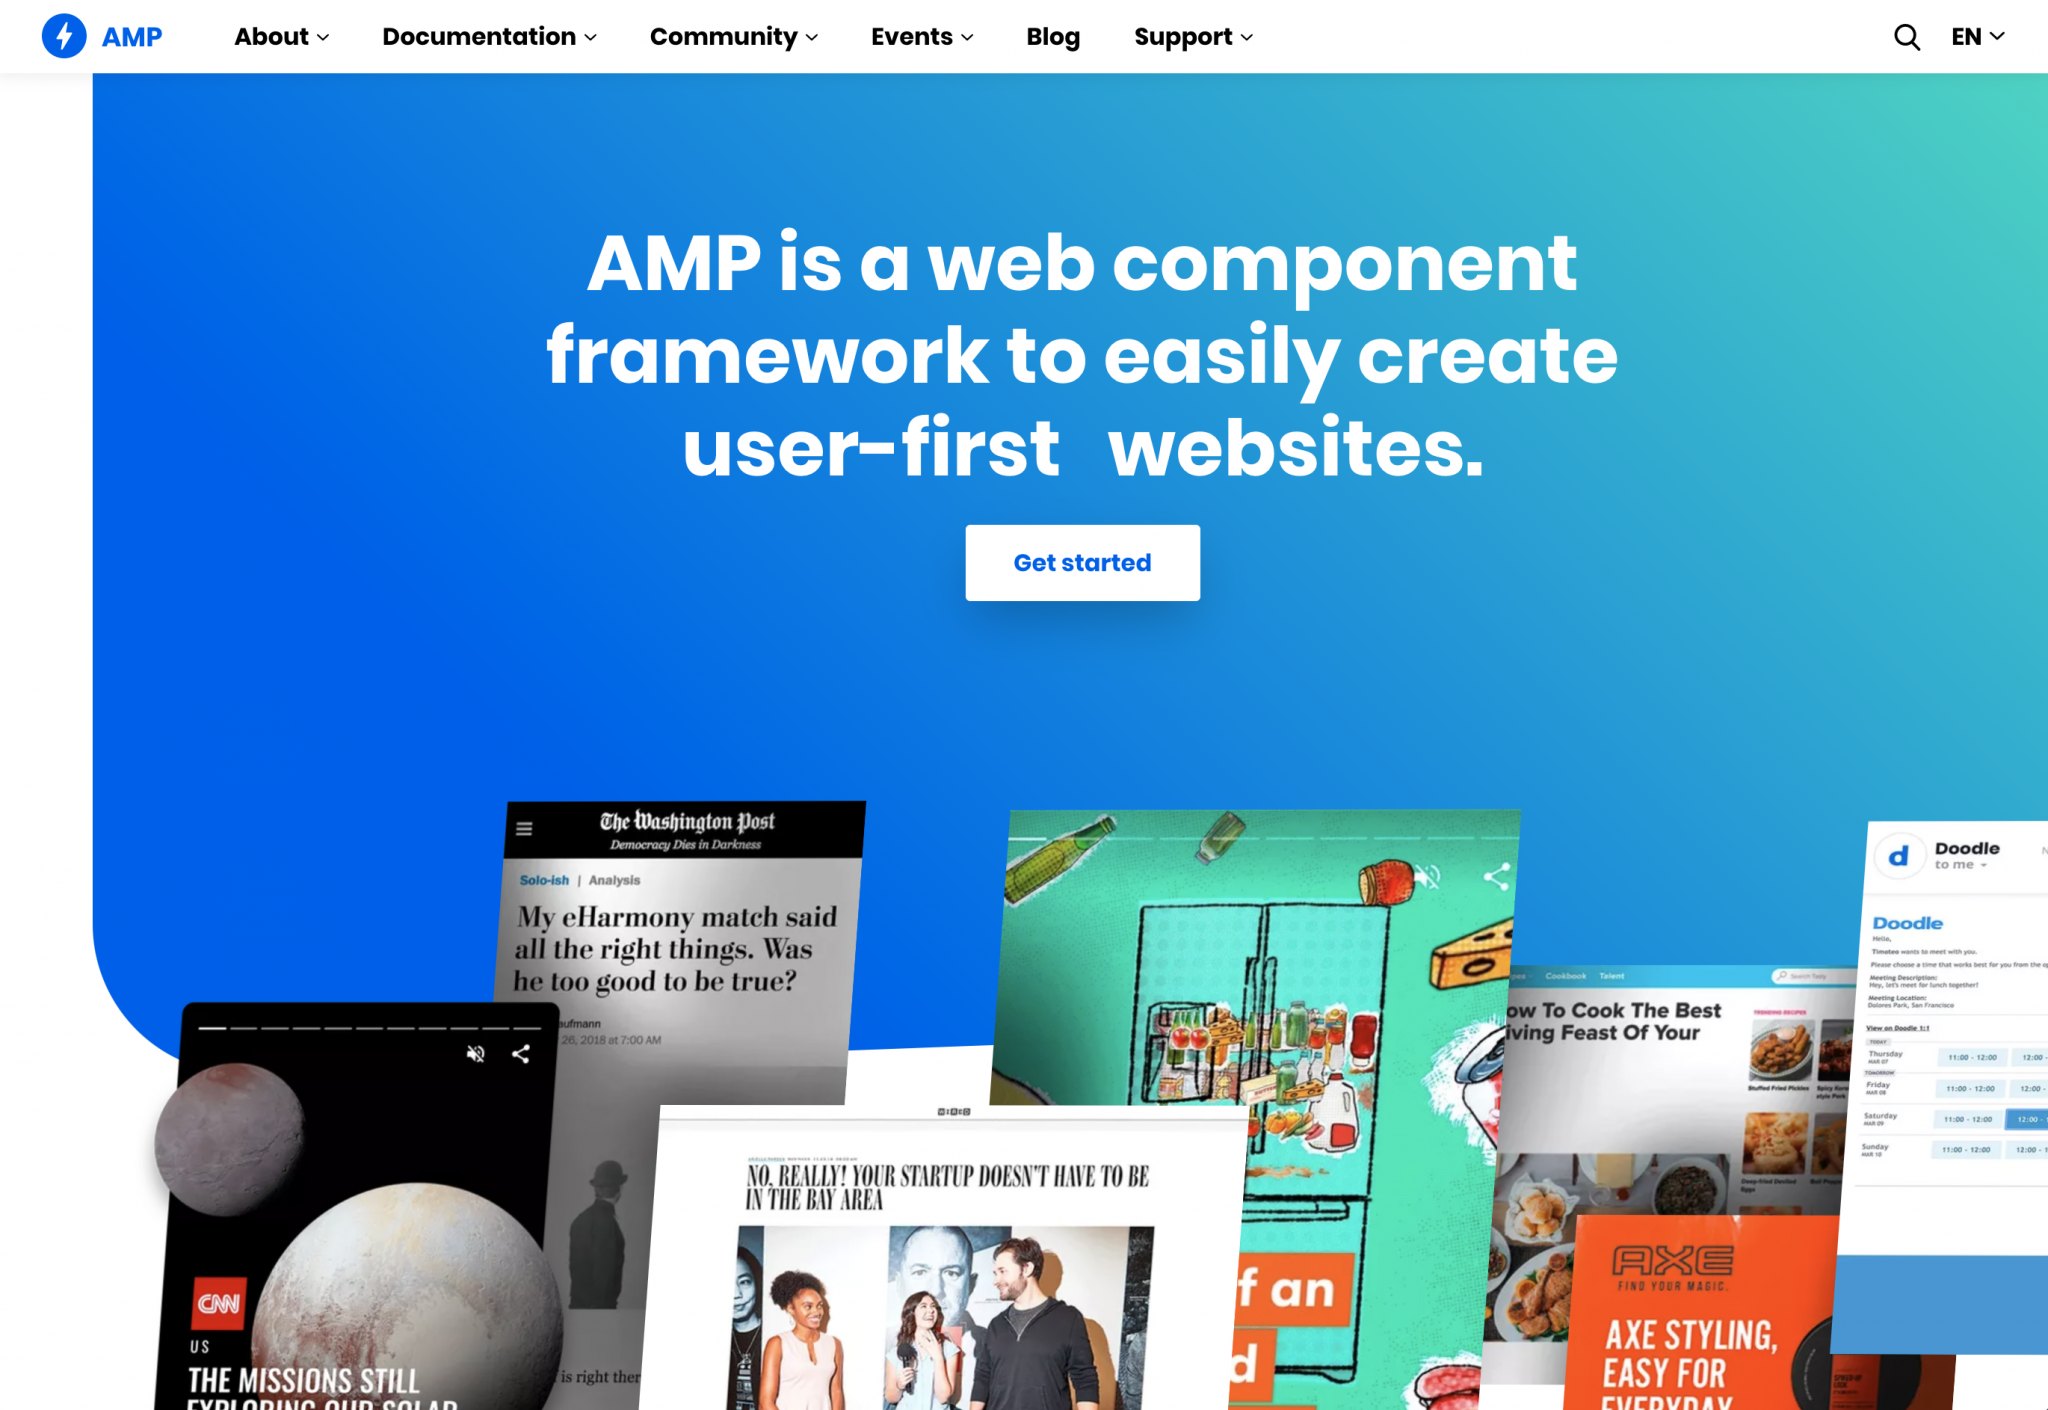 Official AMP website homepage displaying a phrase saying AMP is a web component framework to easily create user-first websites and more